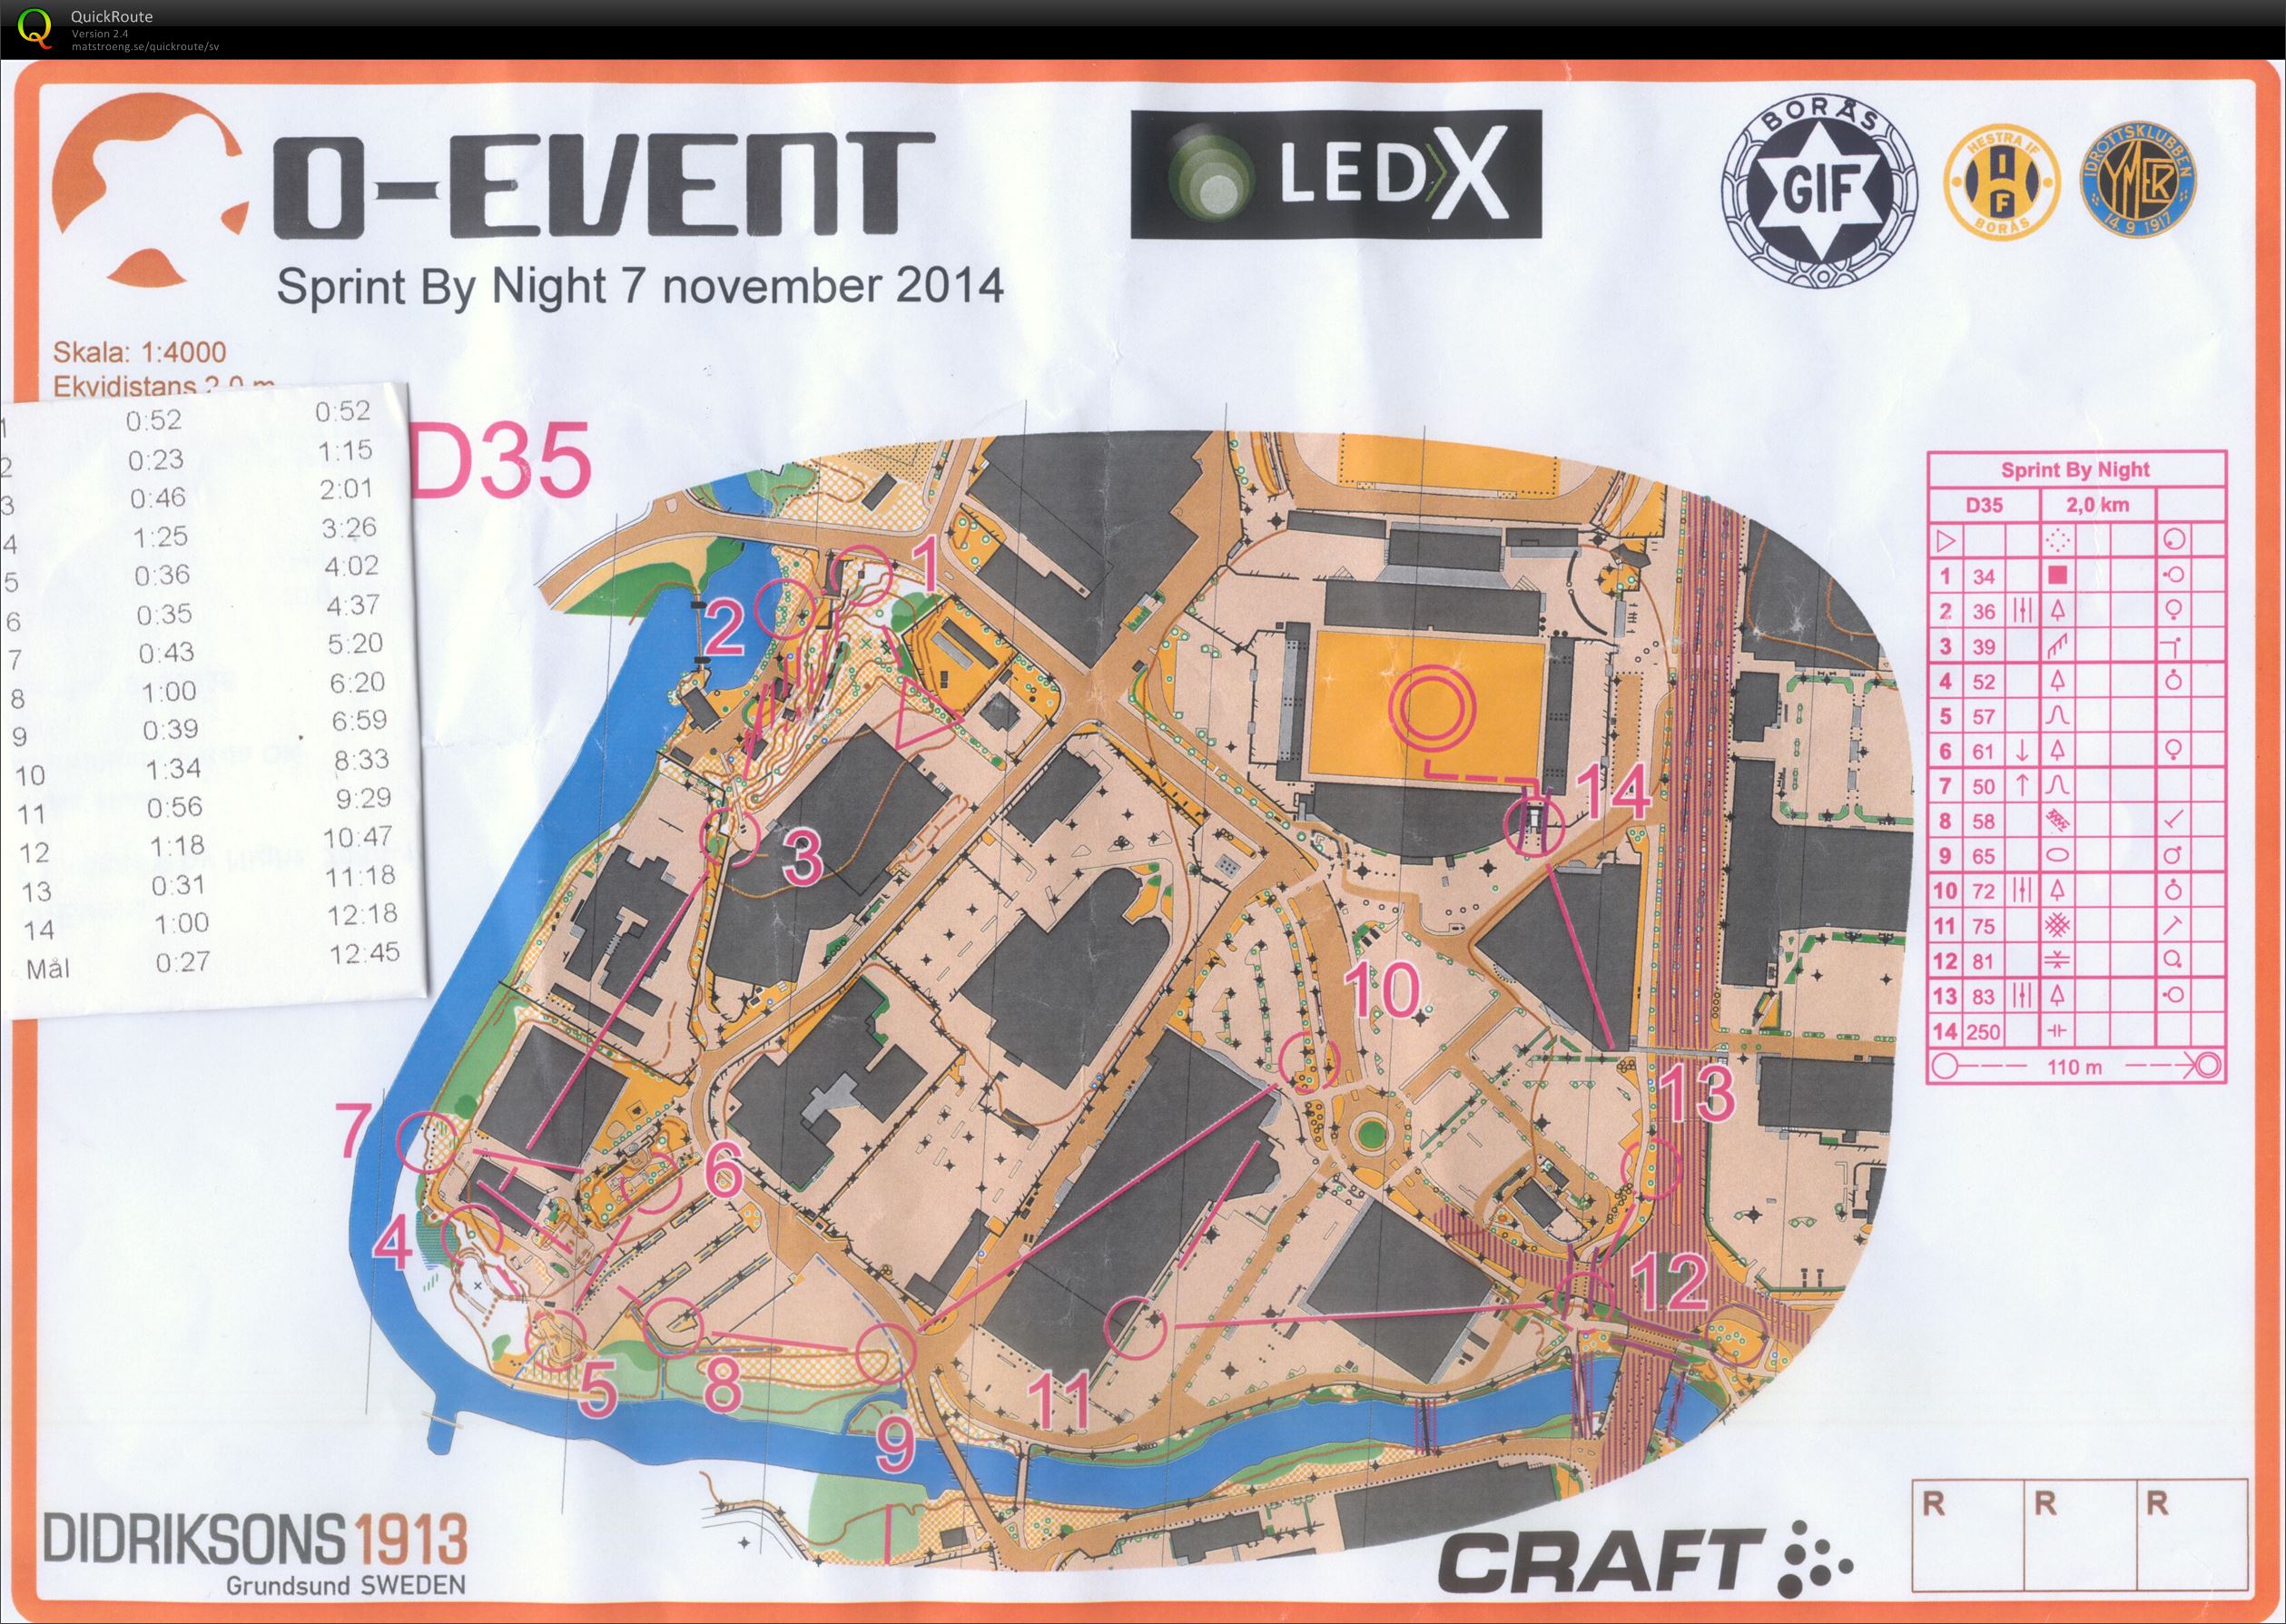 O-event Sprint by Night (D35) (07/11/2014)